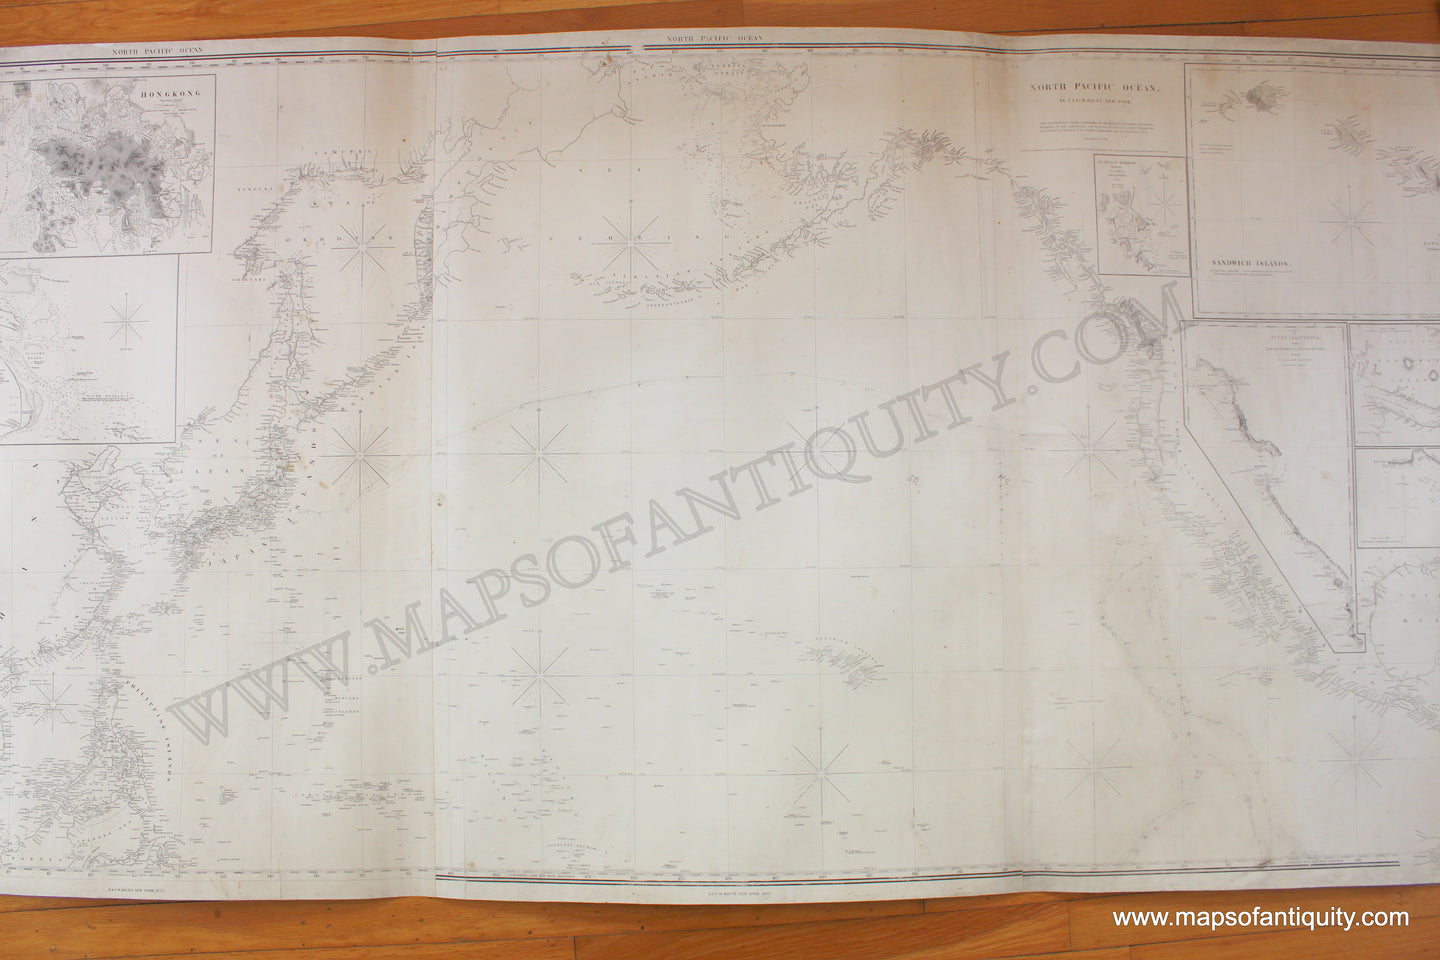 Antique-Nautical-Chart-North-Pacific-Ocean-1849-1865-Blunt-1800s-19th-century-Maps-of-Antiquity